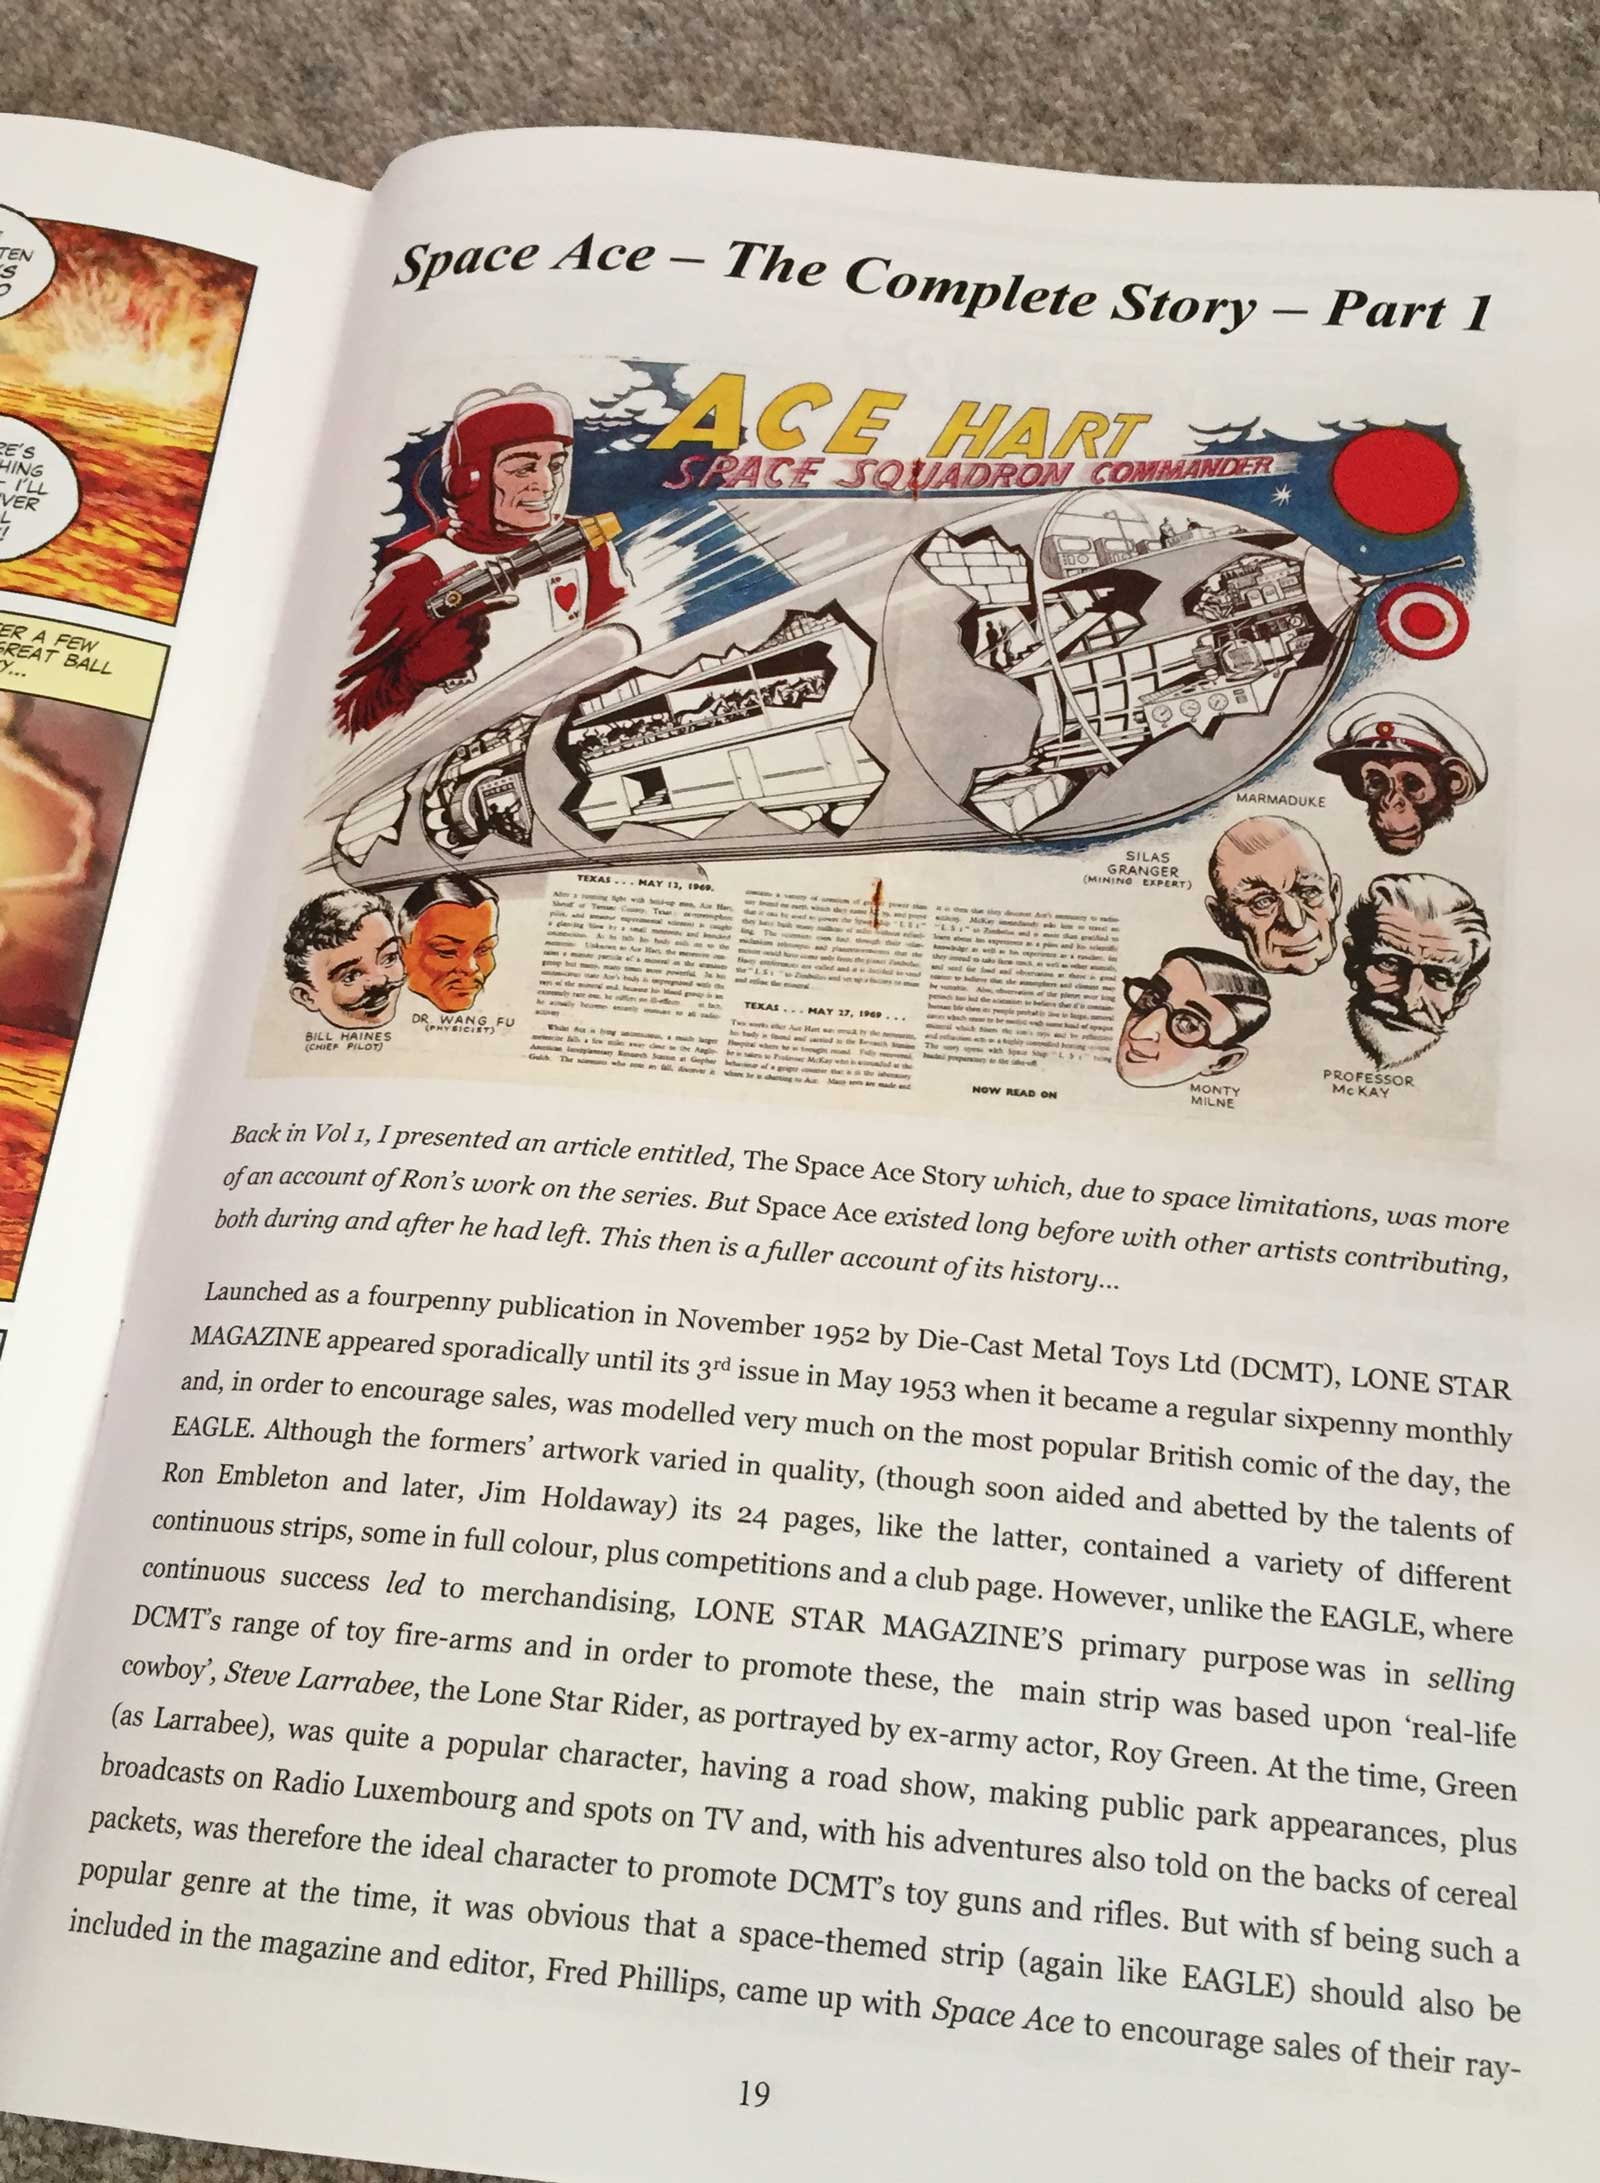 Space Ace Volume 9 - The Space Ace Story